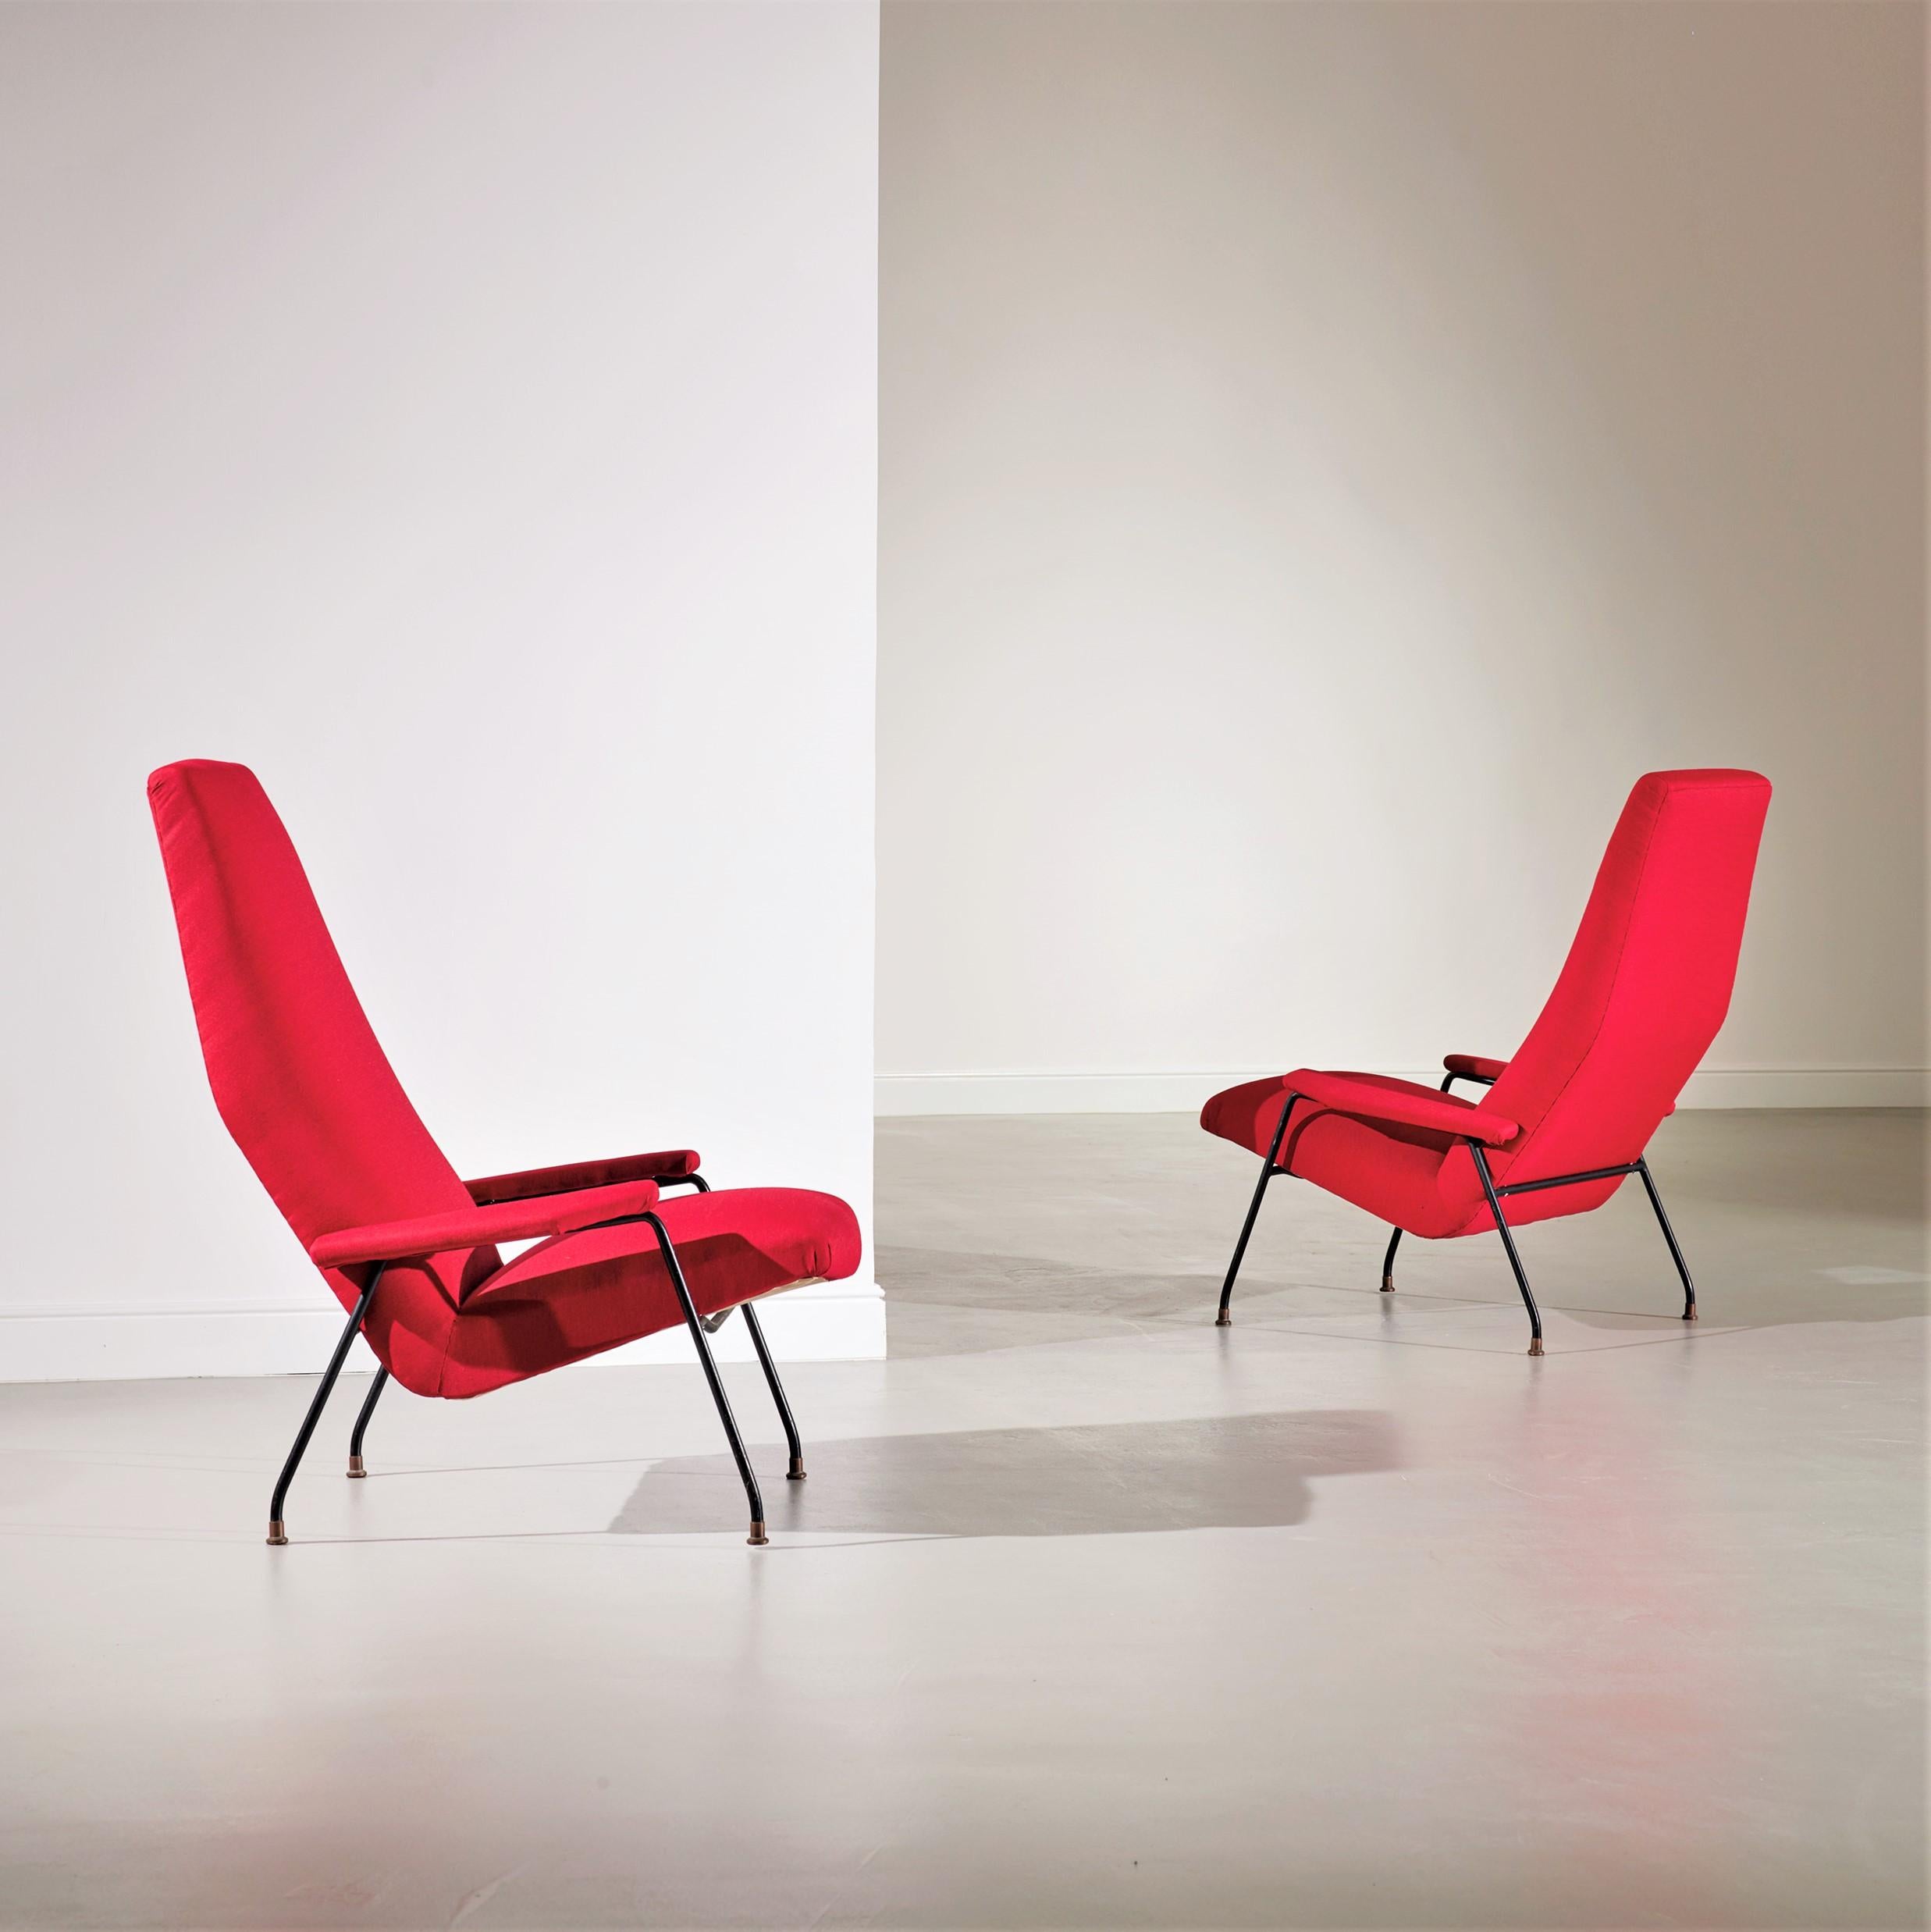 This large and impressive pair of lounge chairs was produced by Saporiti Italia in the 1950s from a design attributed to Augusto Bozzi. The chairs have been upholstered in a red textured fabric and feature Bozzi's renowned black-painted steel frame